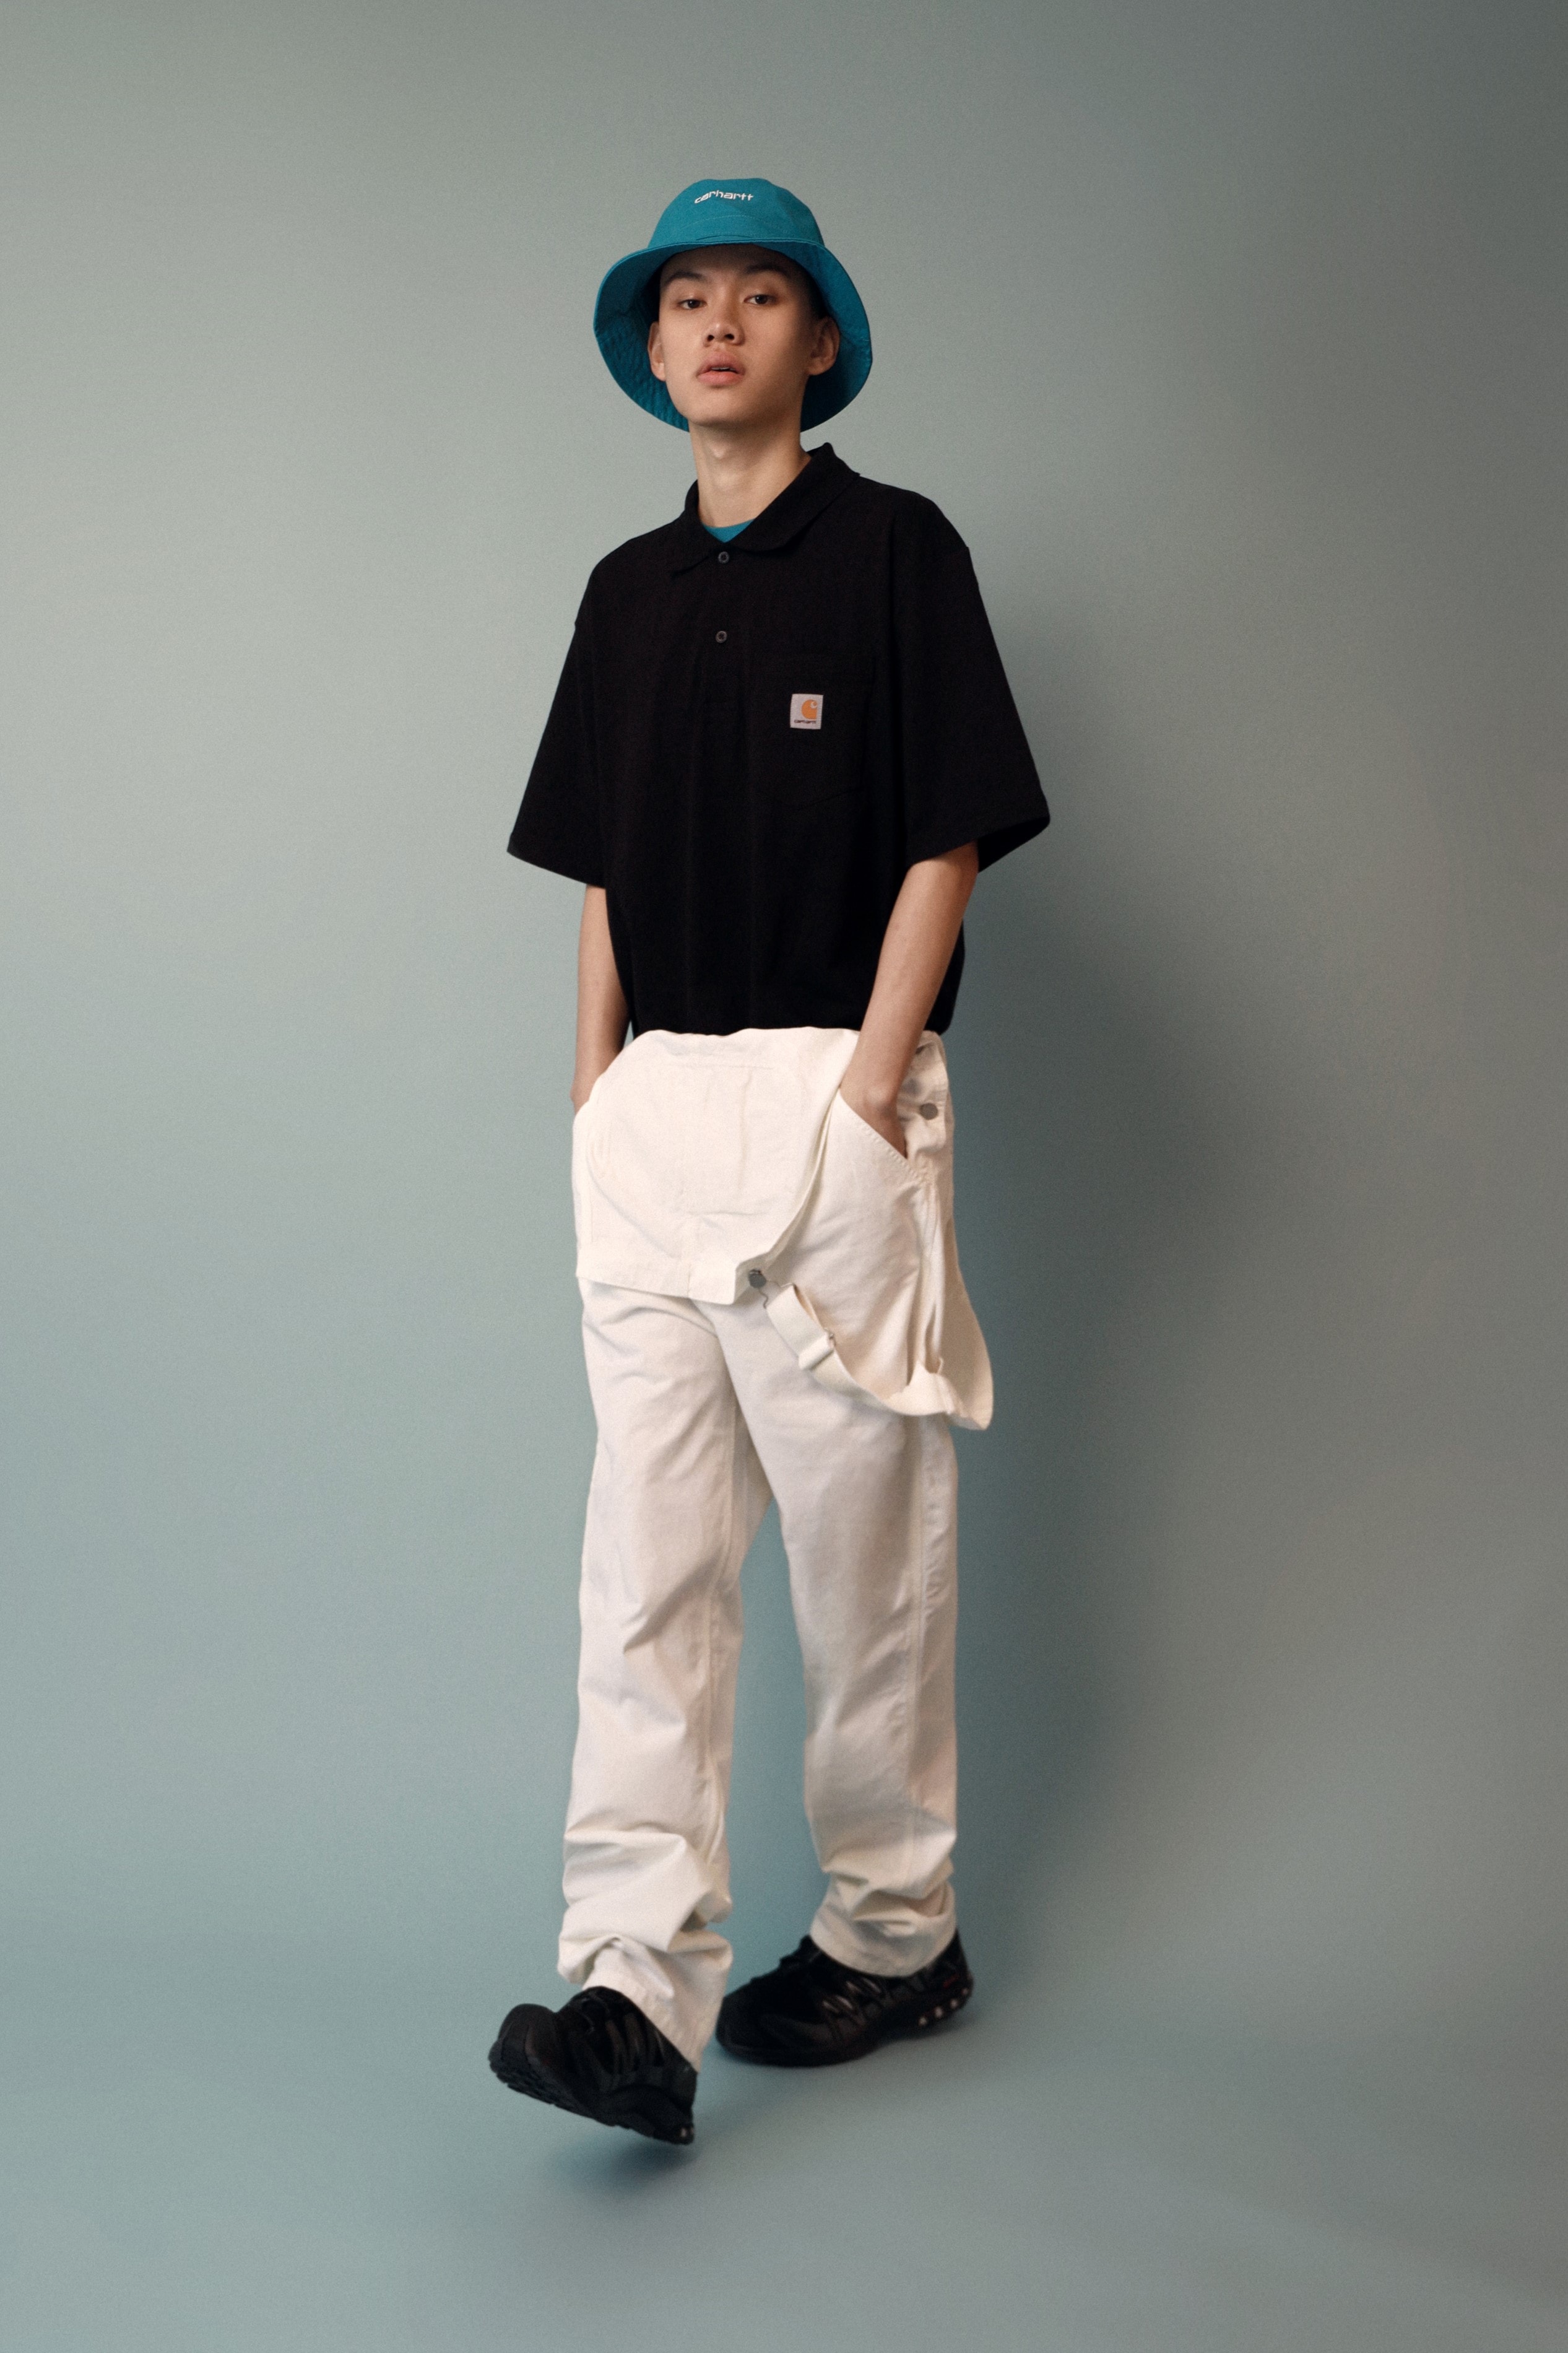 Carhartt WIP 2019 春夏「Exclusive Capsule Collection」系列登場